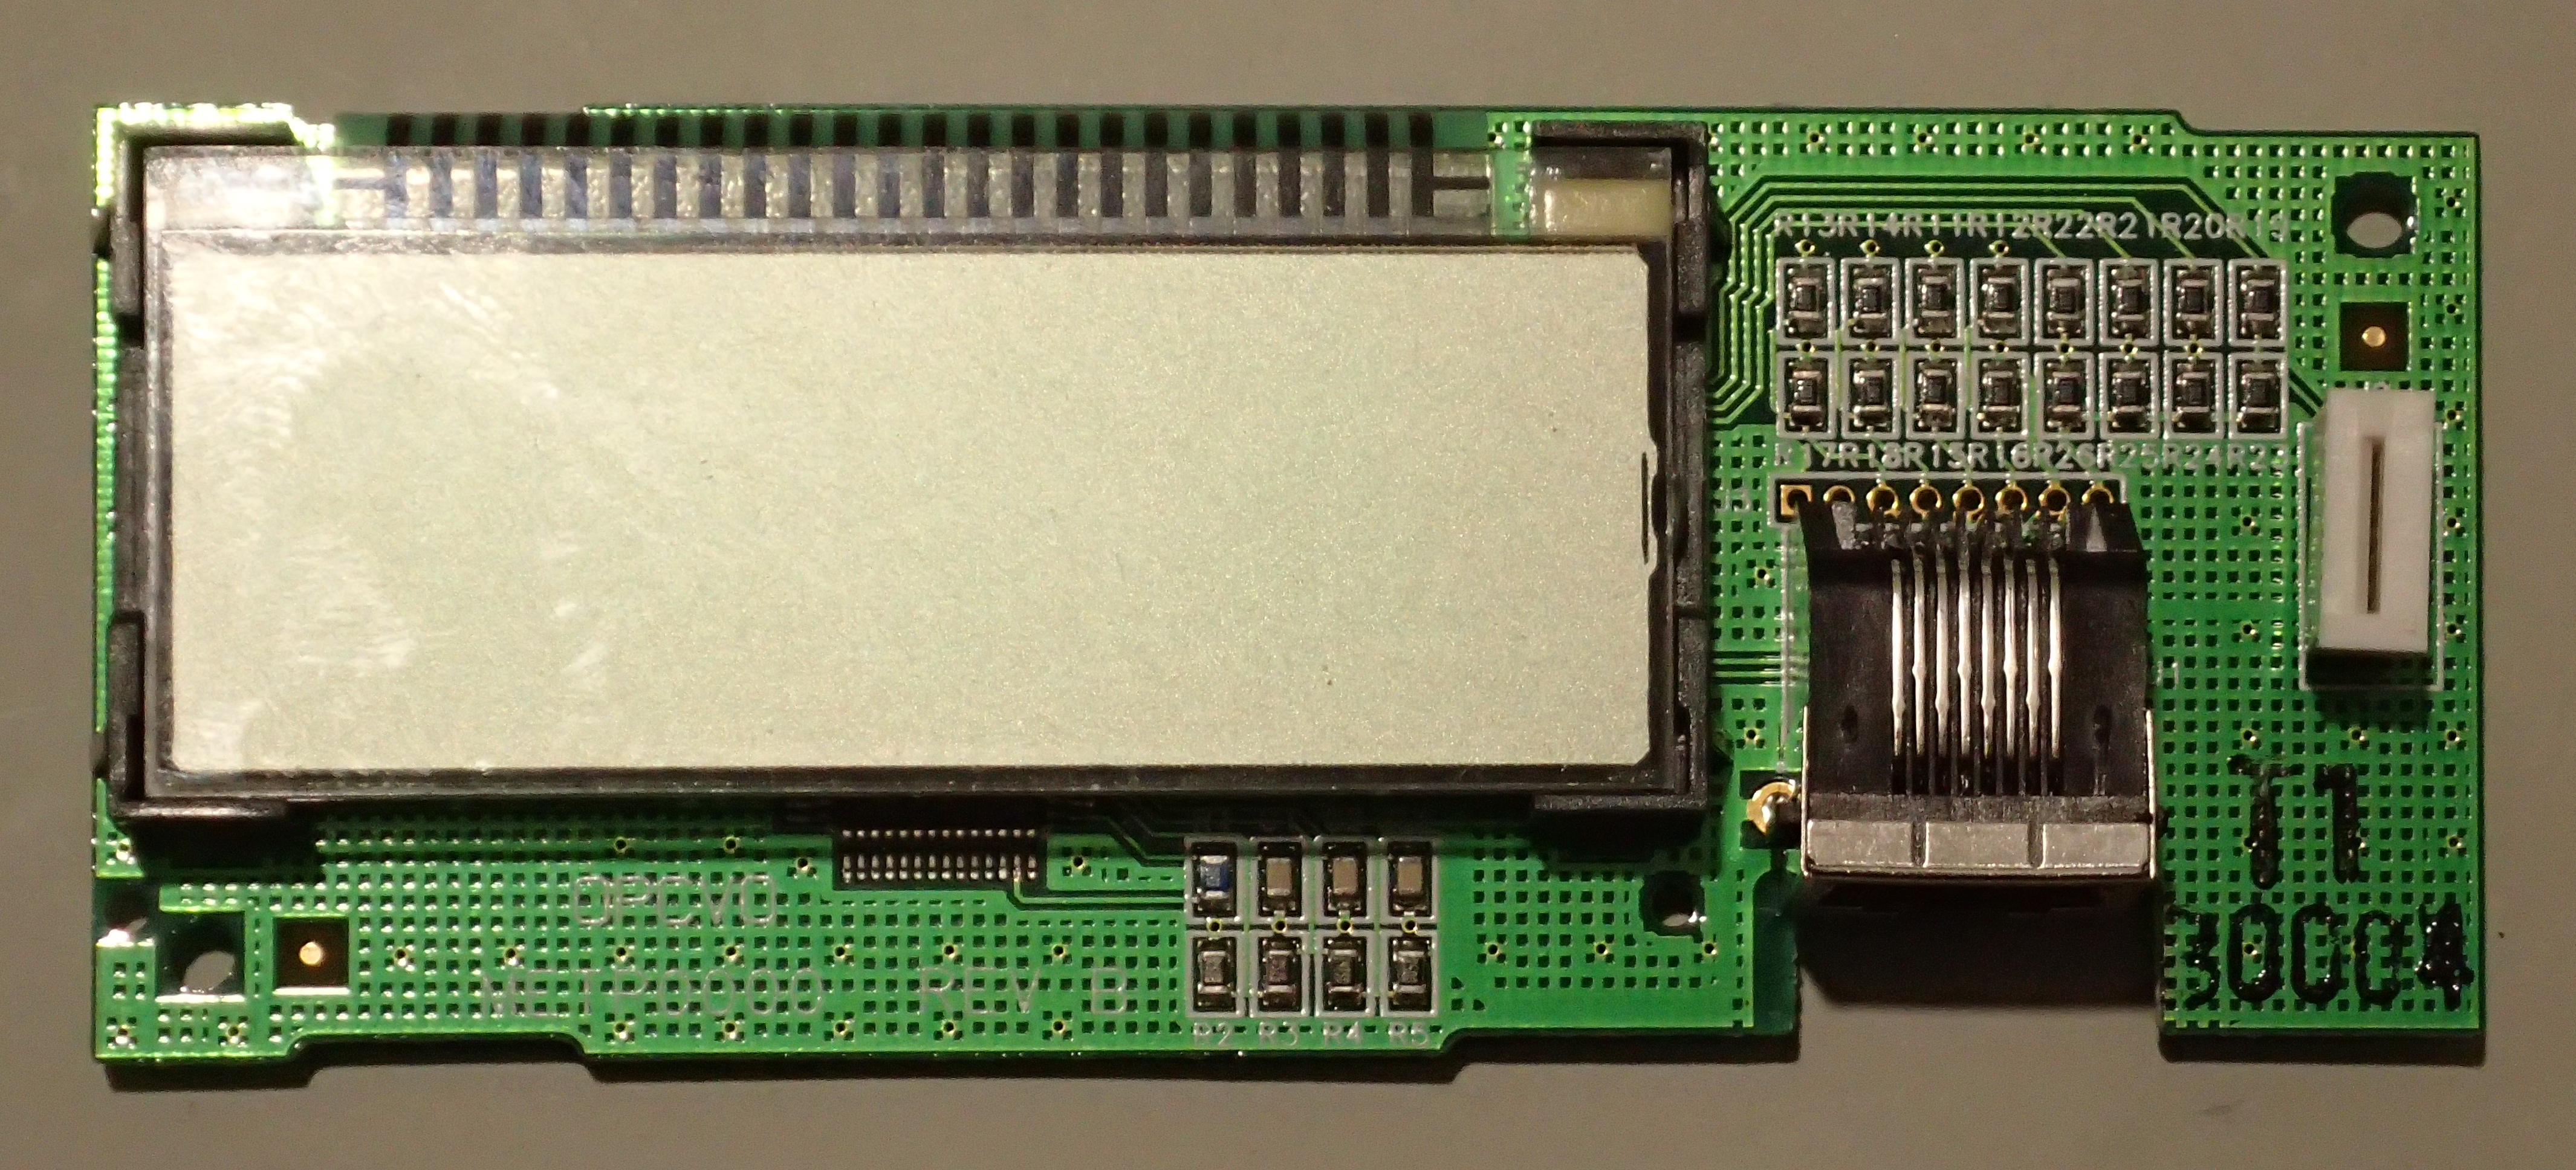 METP0000 LCD panel with cover removed